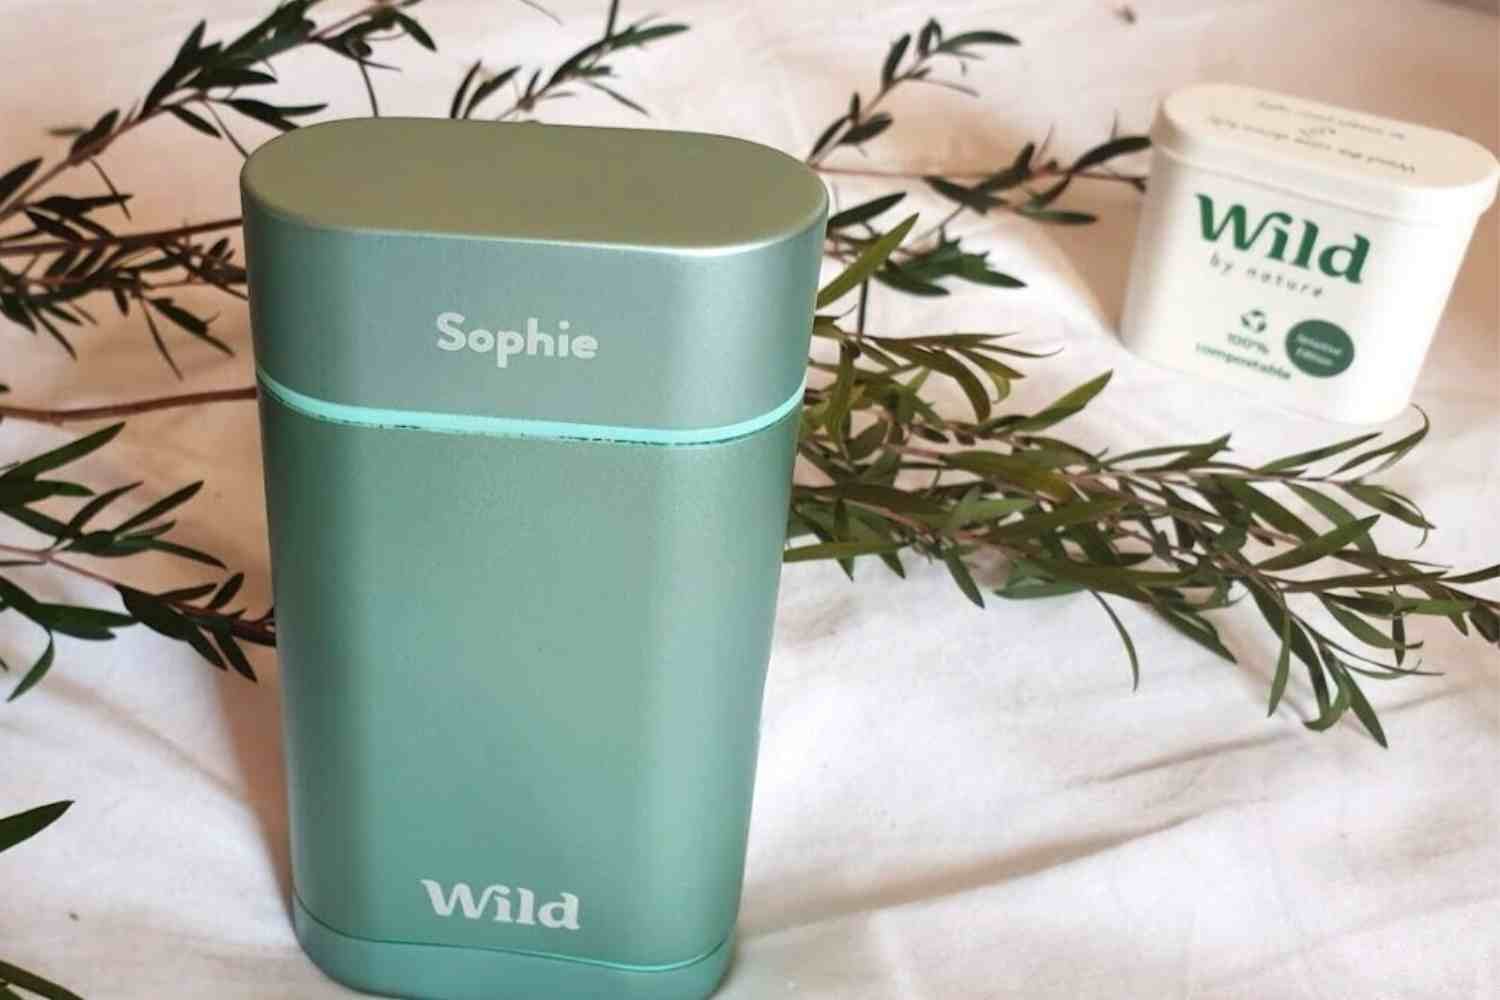 How To Use Wild Deodorant: A Beginner's Guide